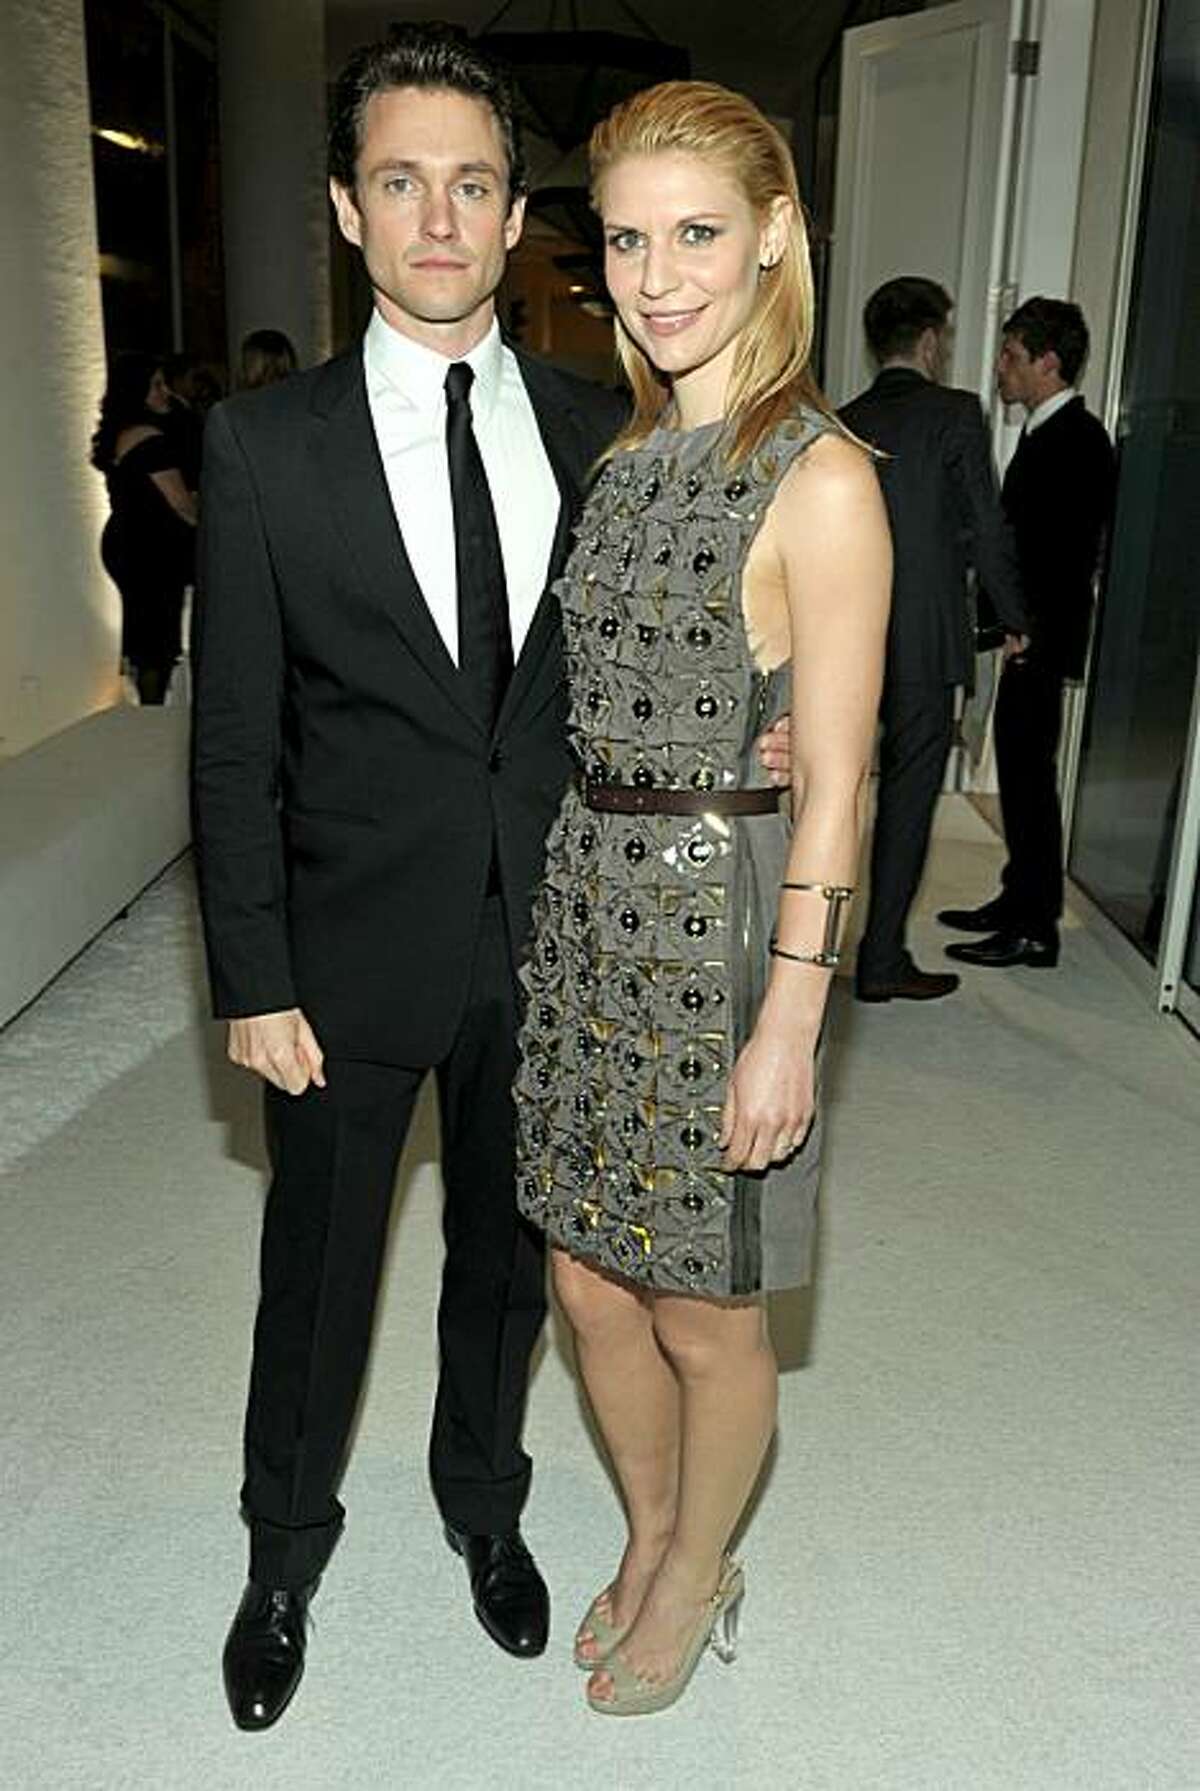 BEVERLY HILLS, CA - FEBRUARY 22: Actress Claire Danes (R) and actor Hugh Dancy arrive at the 13th Annual Costume Designers Guild Awards with presenting sponsor Lacoste held at The Beverly Hilton hotel on February 22, 2011 in Beverly Hills, California. (Photo by Alberto E. Rodriguez/Getty Images for CDG)